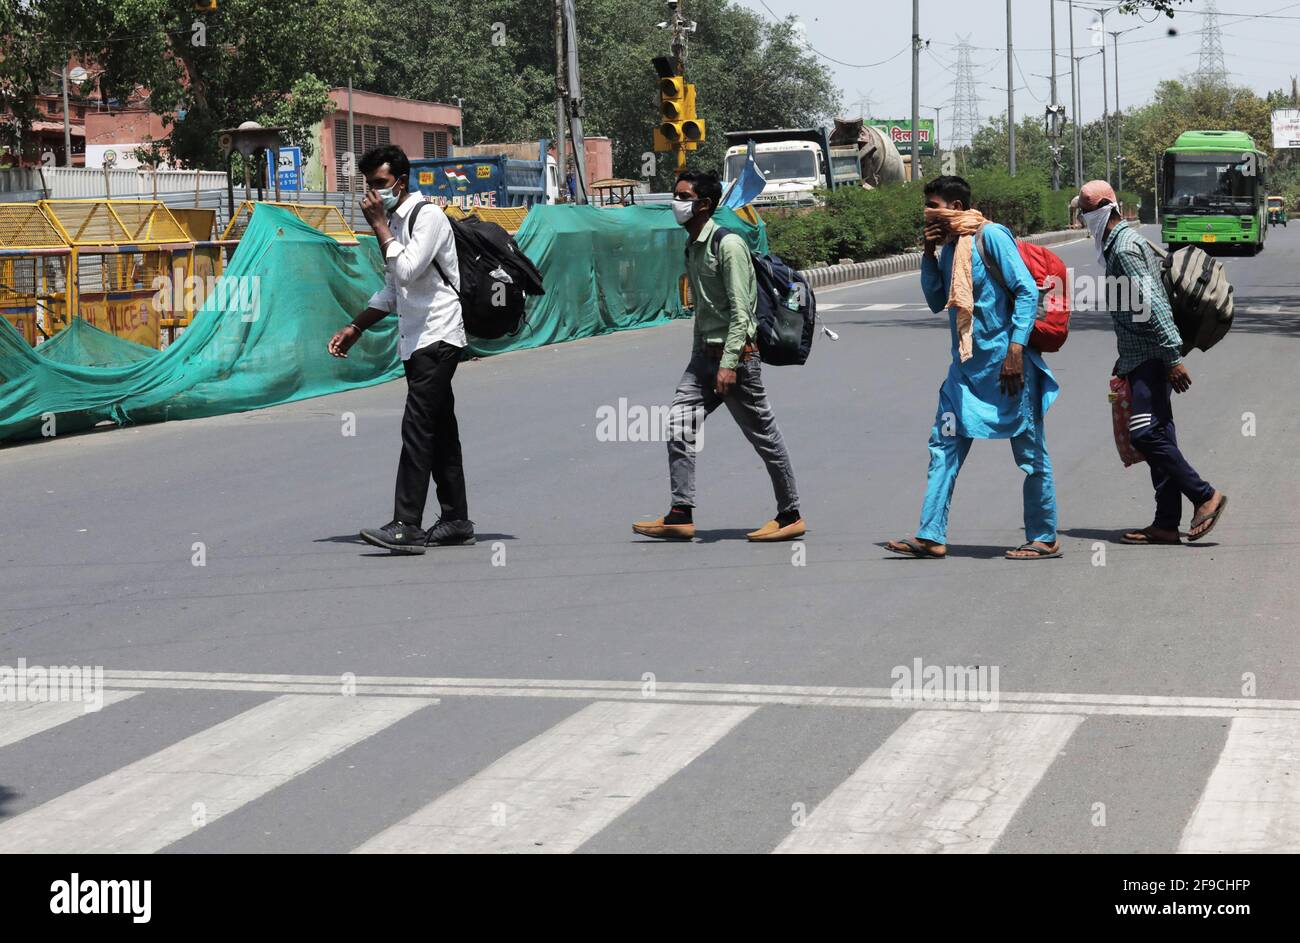 New Delhi, India. 17th Apr, 2021. Migrant workers walk towards Chandni Chowk area as they return to their native places amid fears of a total lockdown during the weekend lockdown.The alarming situation this weekend lockdown was imposed to fight Covid-19 cases. Delhi and other state governments imposed partial restrictions on weekend lockdowns and night curfews. People remained confined to their homes so that they could break the chain of coronavirus transmission. India has reported a record 217,353 new cases on Friday. Credit: SOPA Images Limited/Alamy Live News Stock Photo